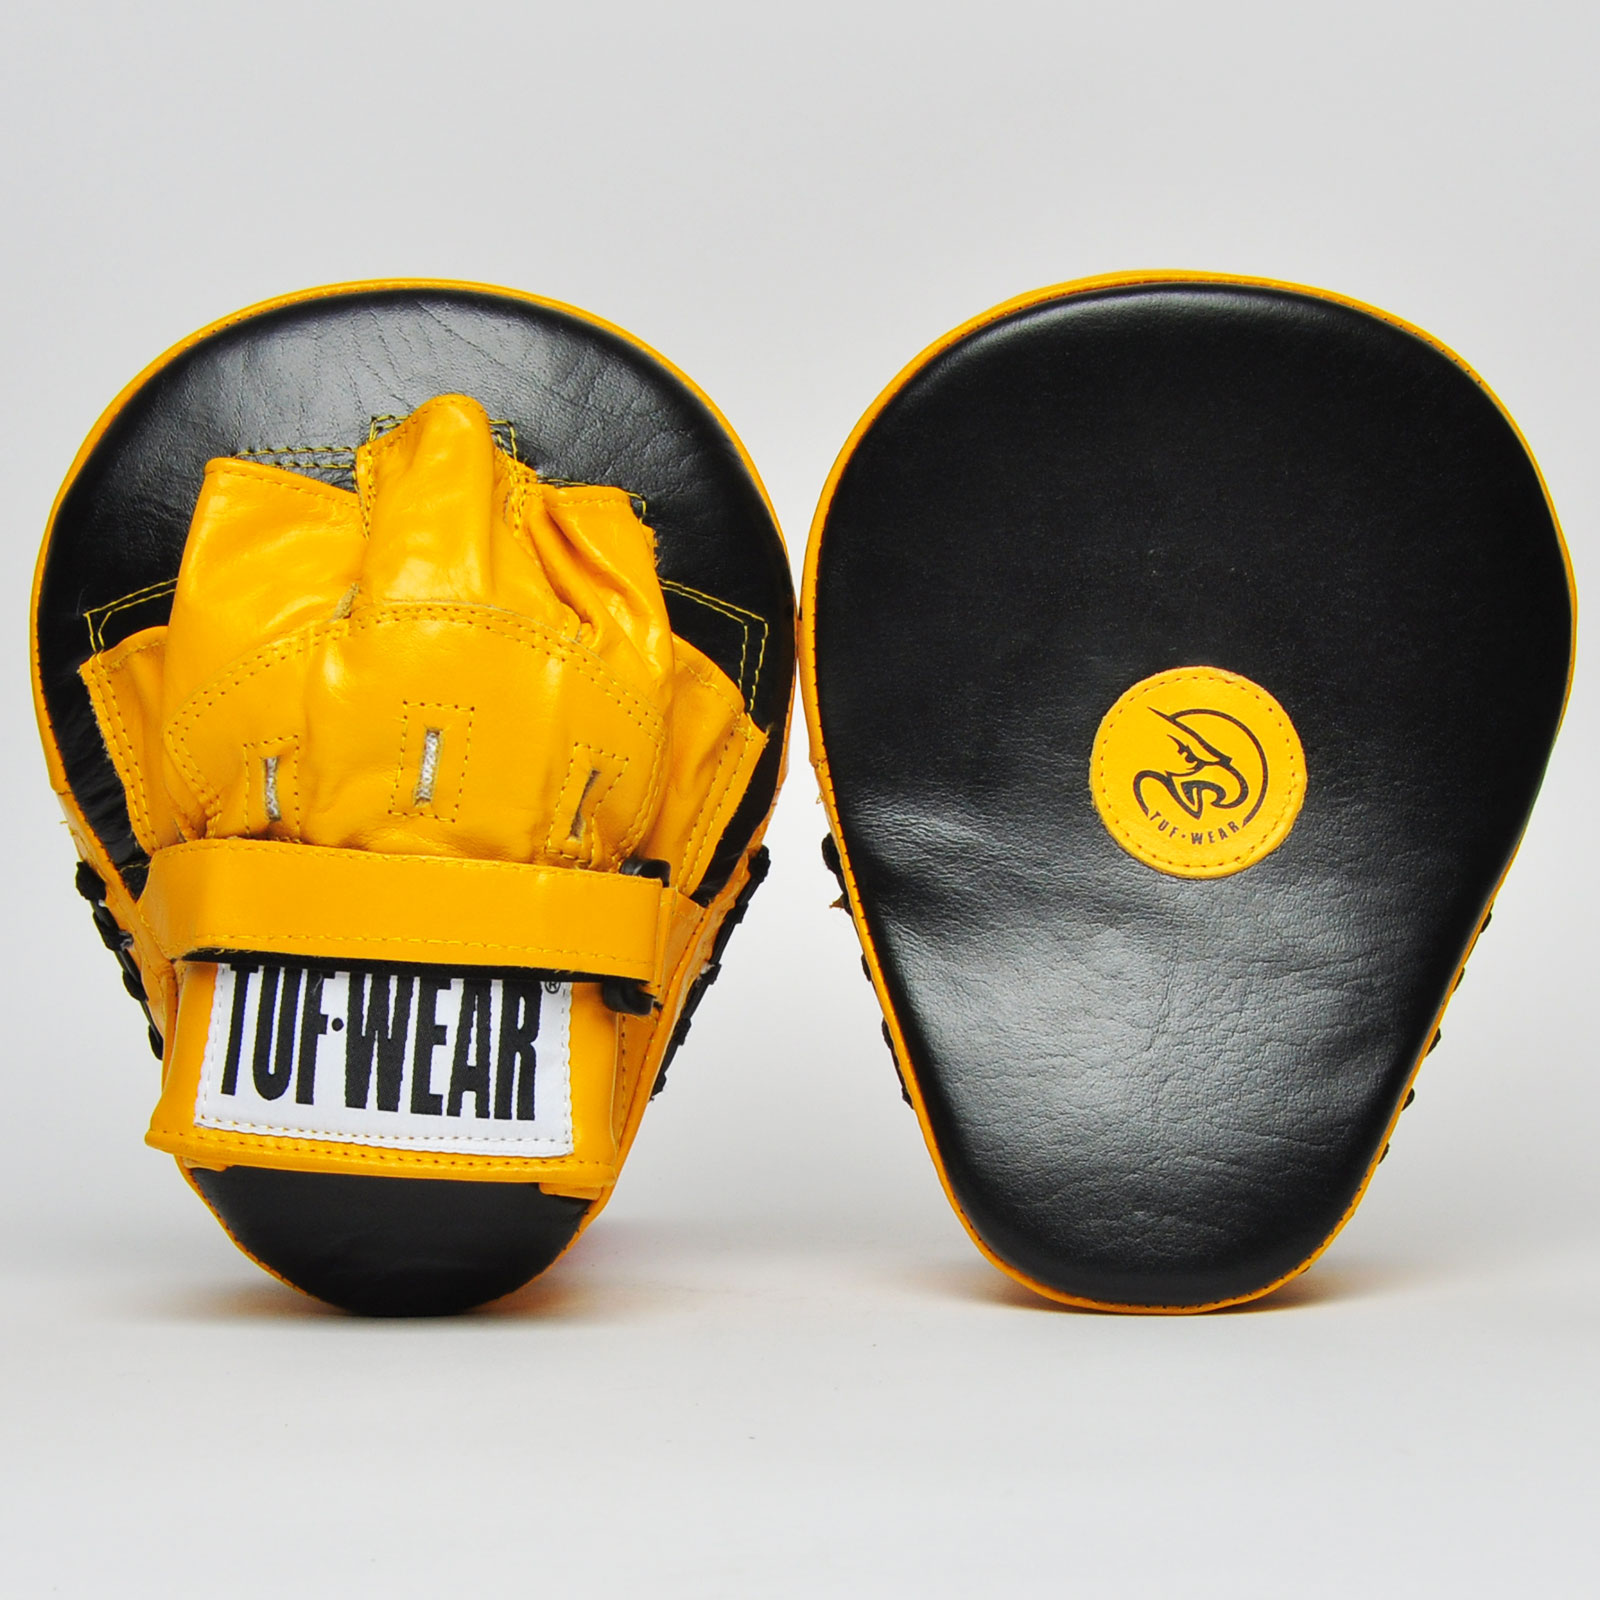 Tuf Wear Boxing Focus Mitts  Lightweight Curved Hook and Jab Pad